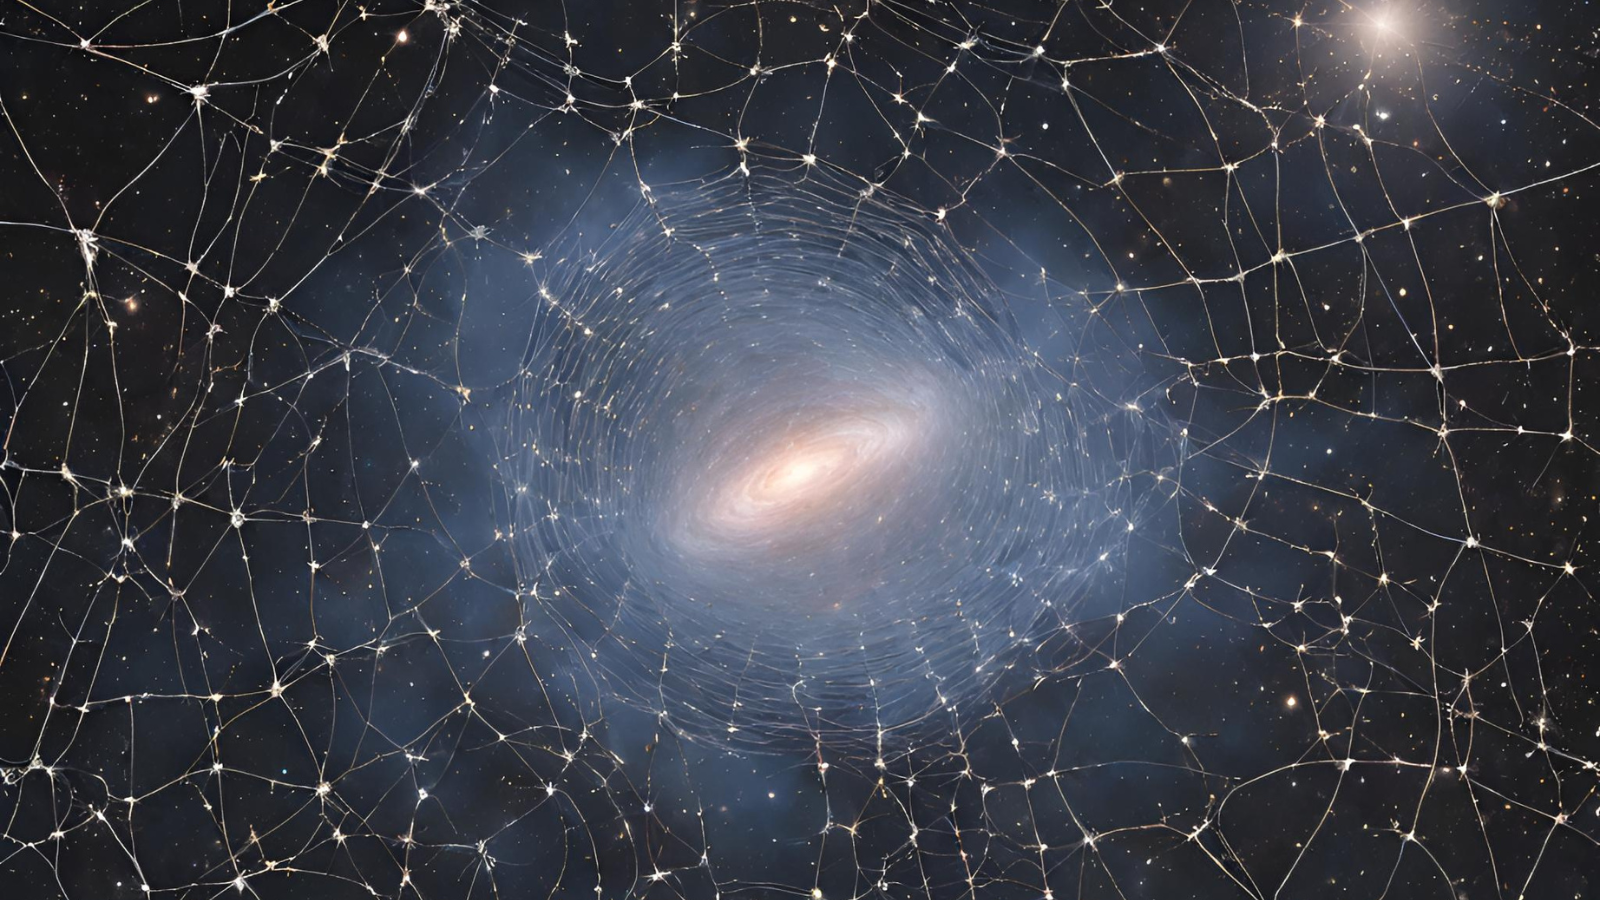 How do galaxies grow while ensnared in the universe’s cosmic web? Space